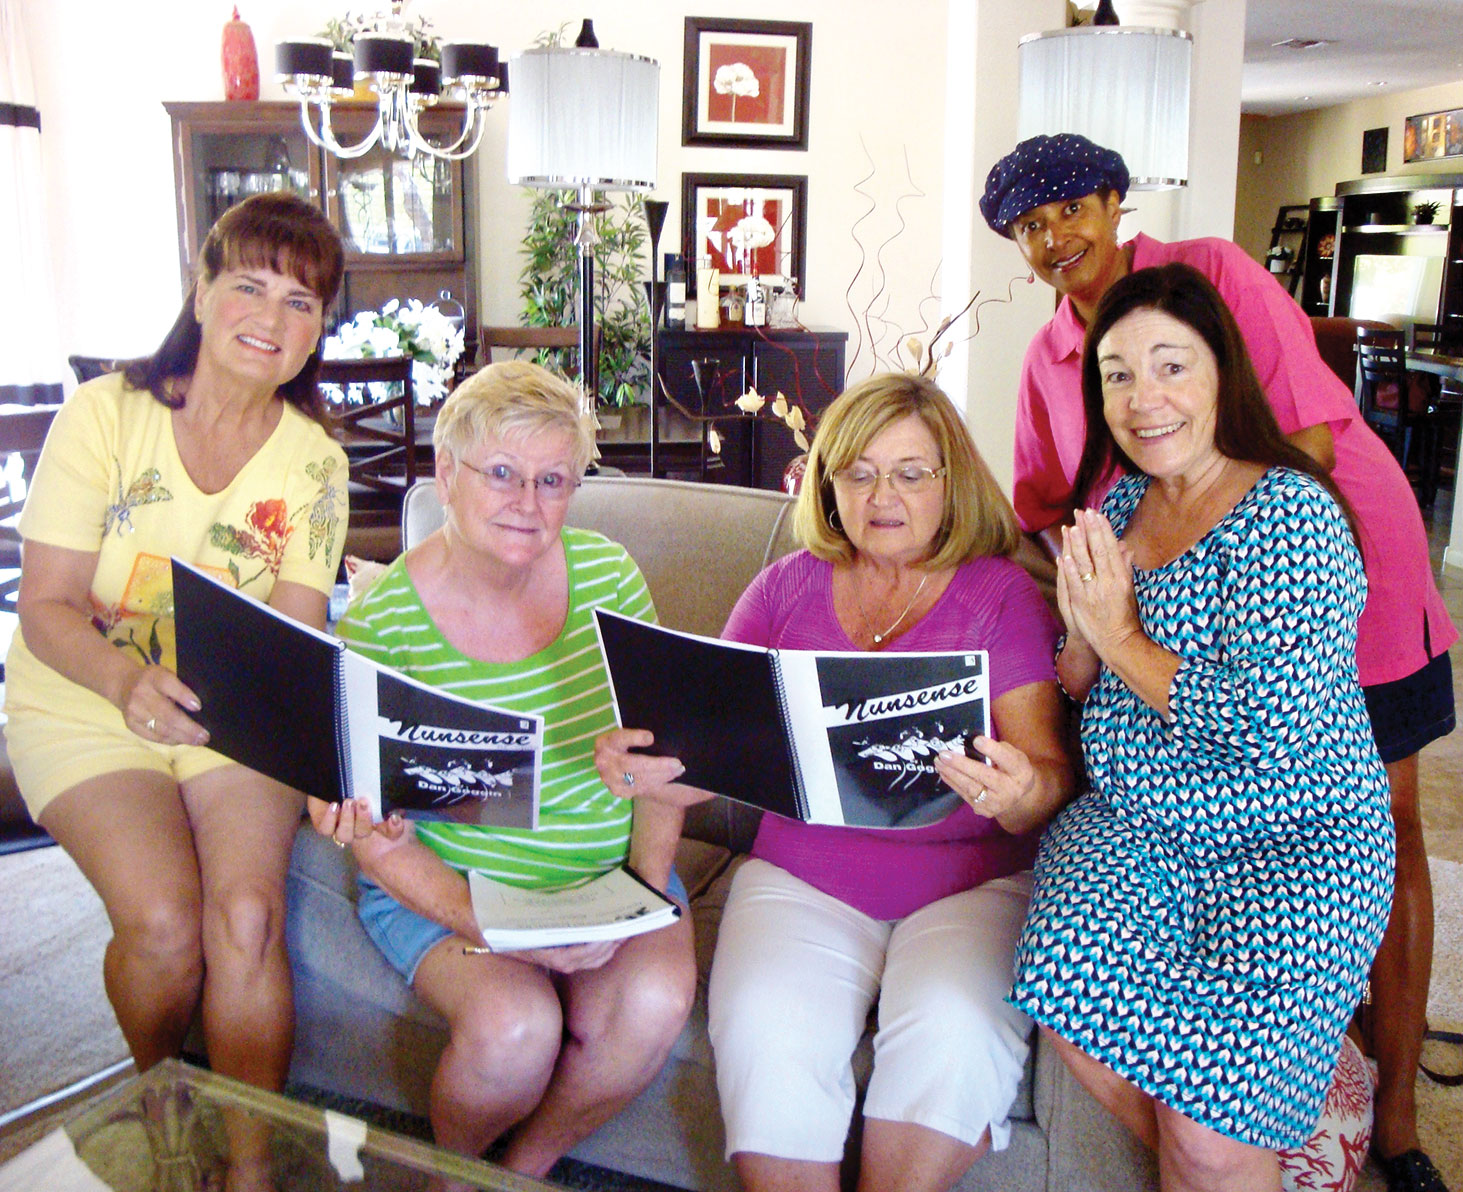 The cast of Nunsense doing a first read-through of their script, from left: Alice Lewis, Pat Ingalls, Judi Alonzo, Kathy Mitchell and Patrice Cole